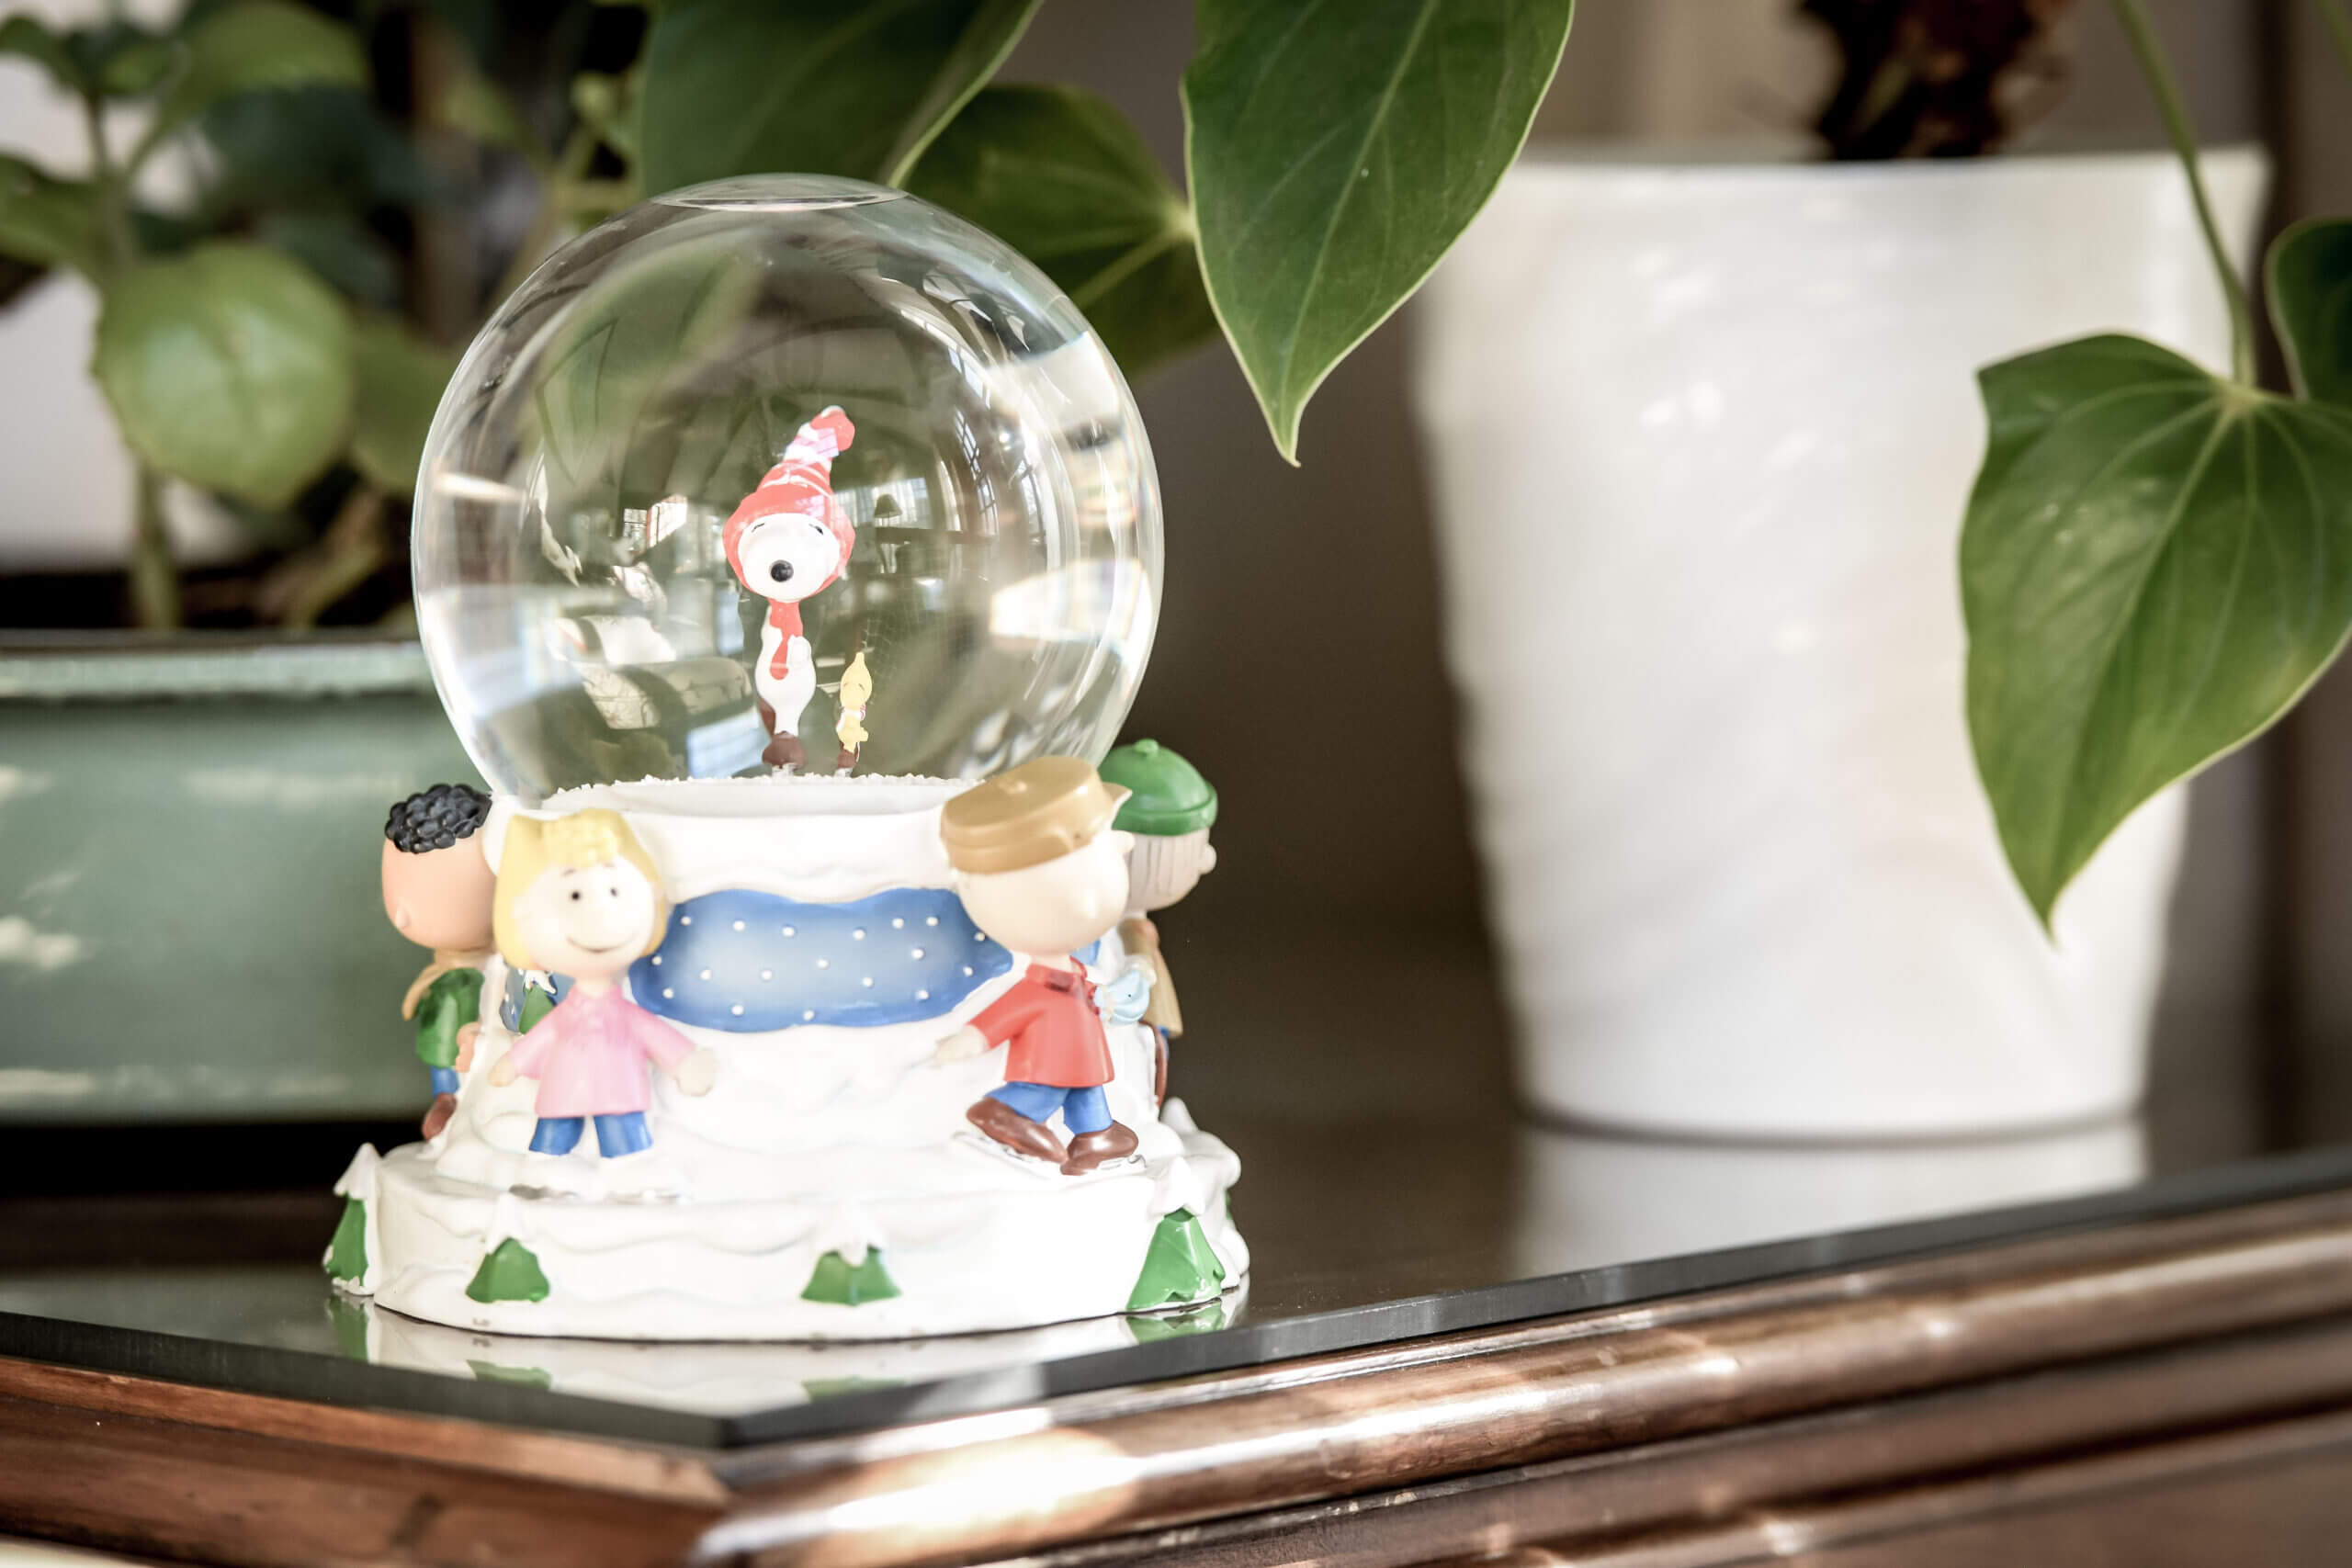 Snoopy snow globe sitting on a table with some plants behind it